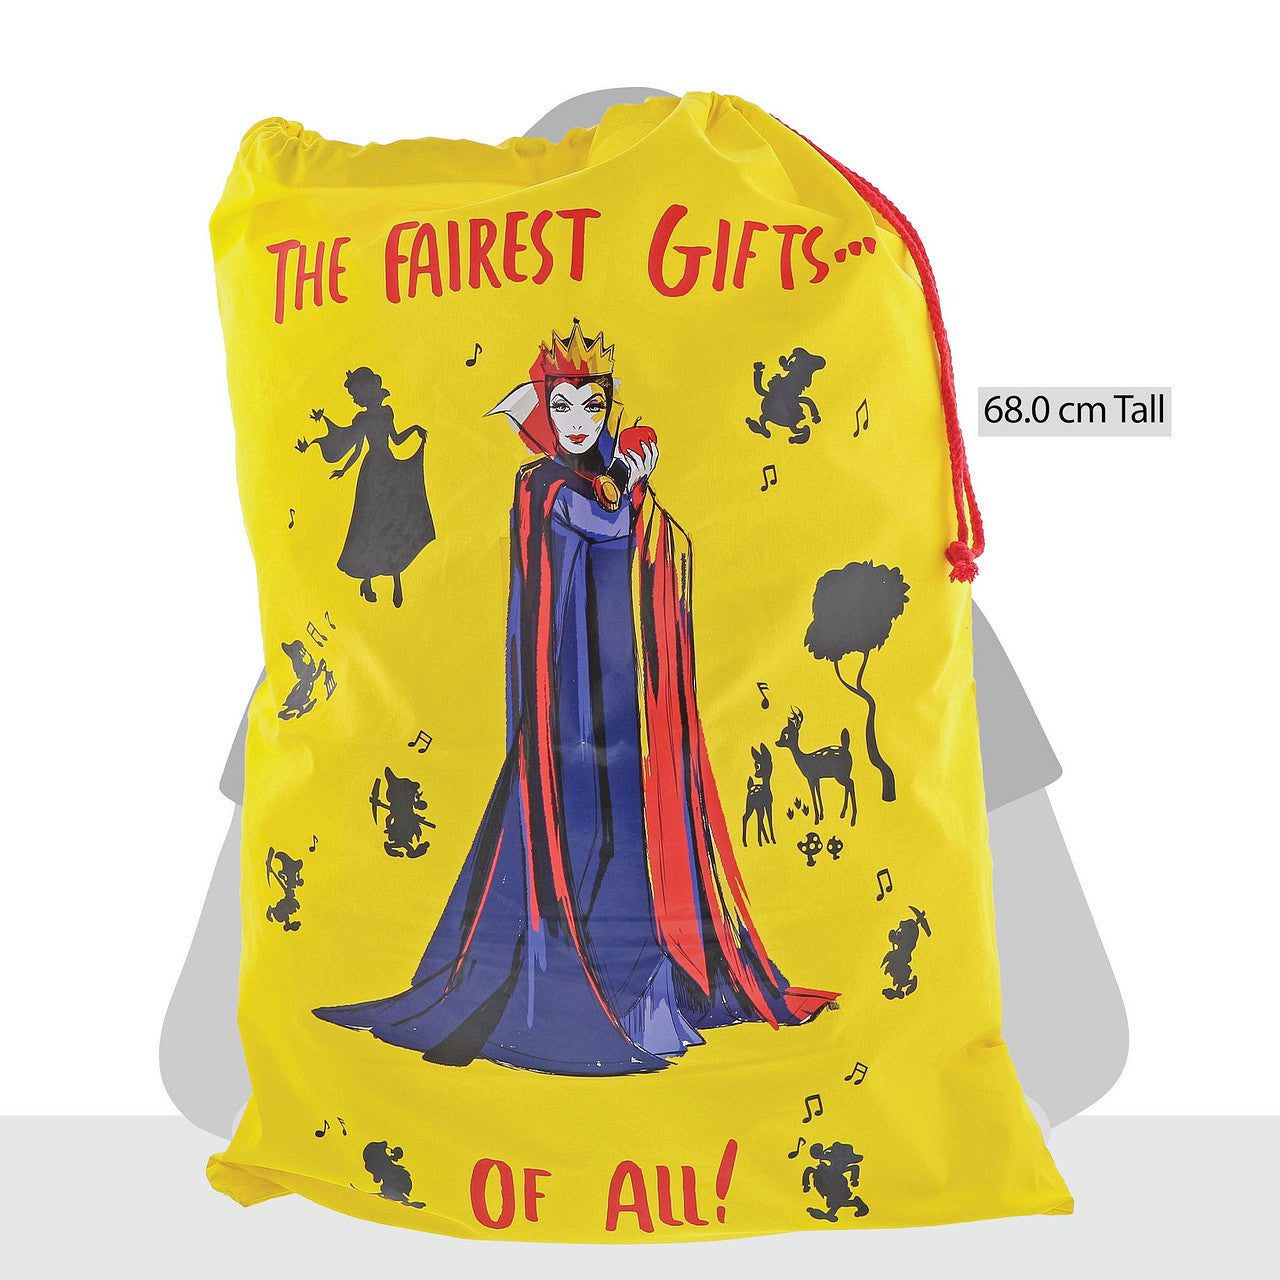 The Fairest Gifts - Evil Queen Sack